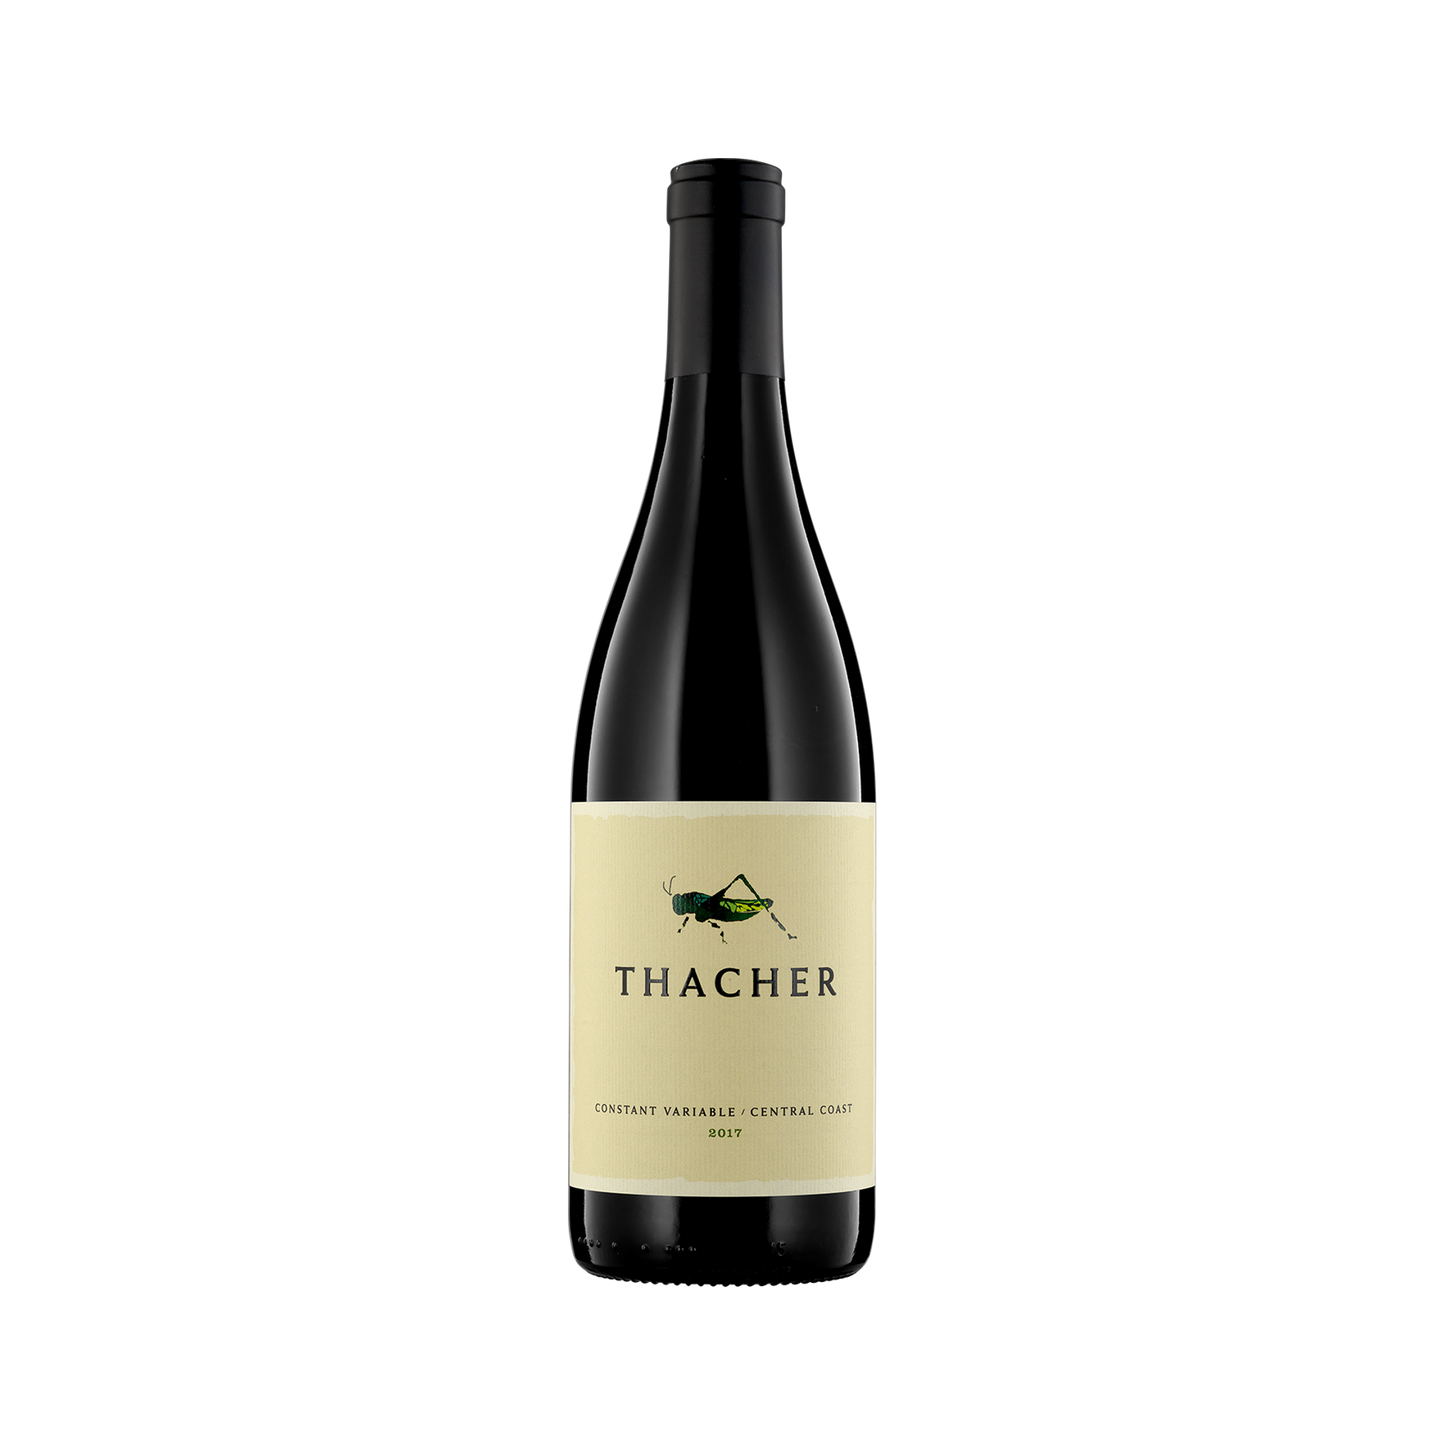 A bottle of Thacher 2017 'Constant Variable' Red Blend